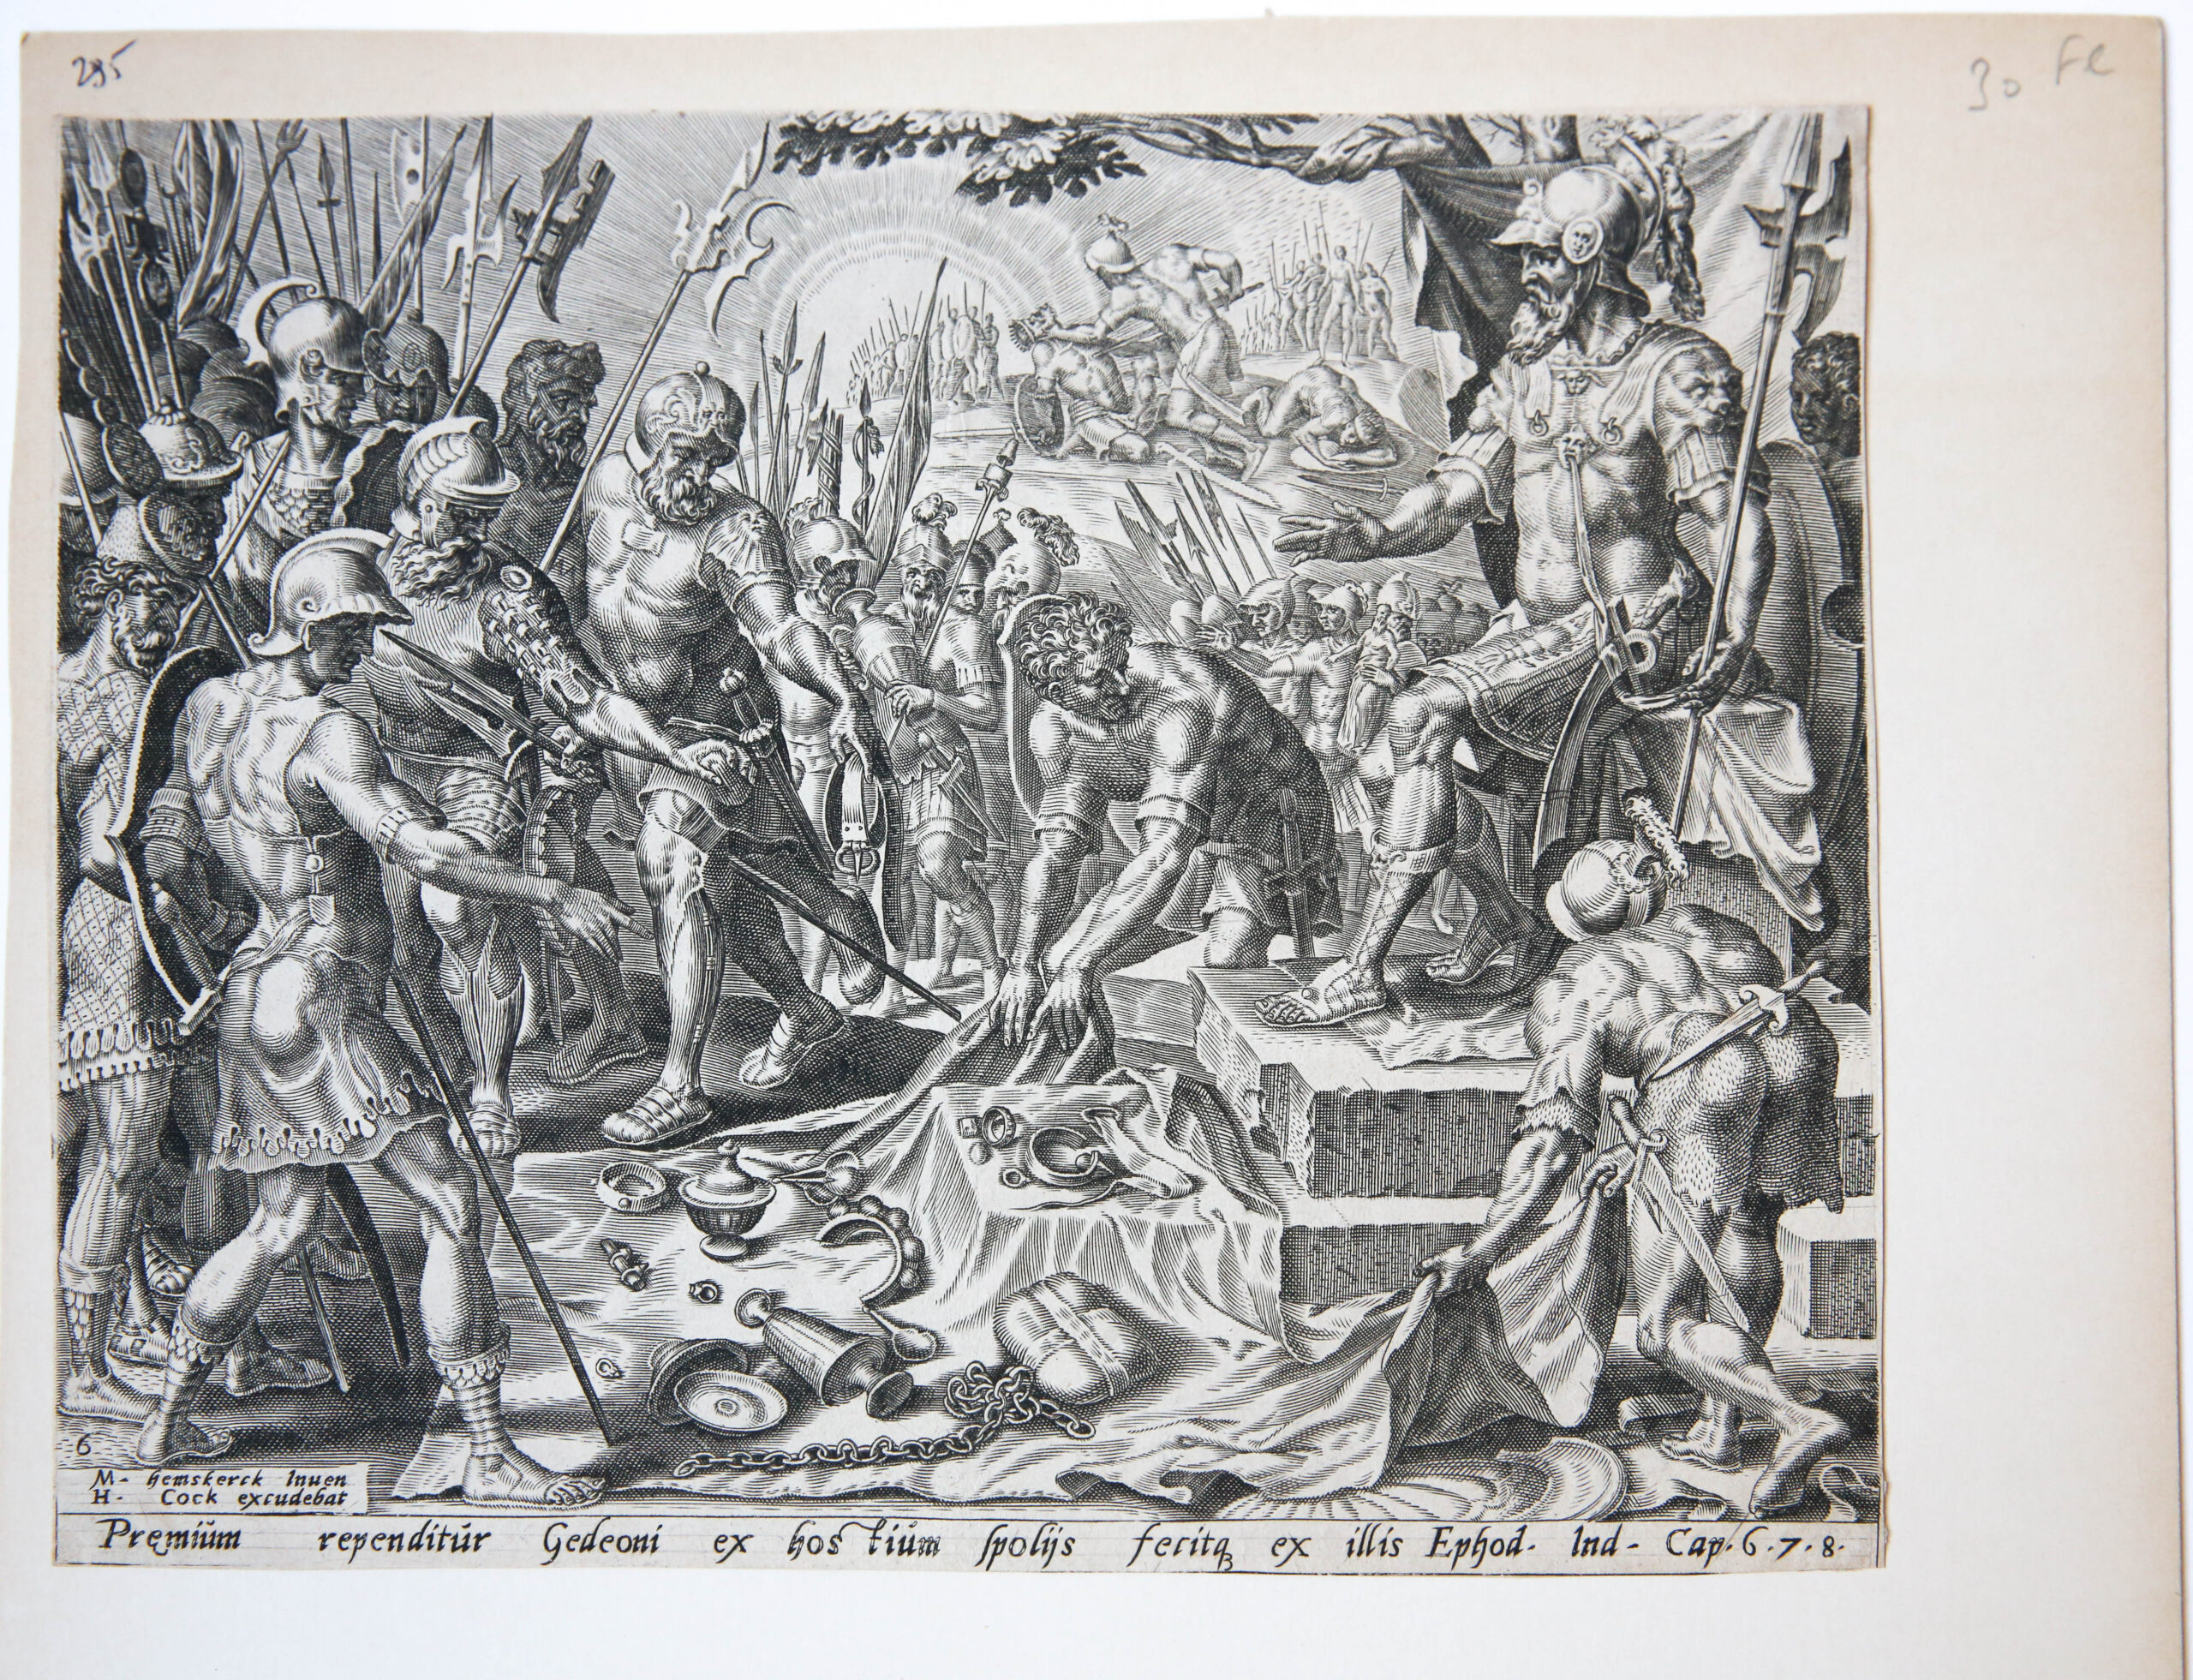 Biblical print: Gideon receiving a share from the spoils [Judg. 8:21-26]